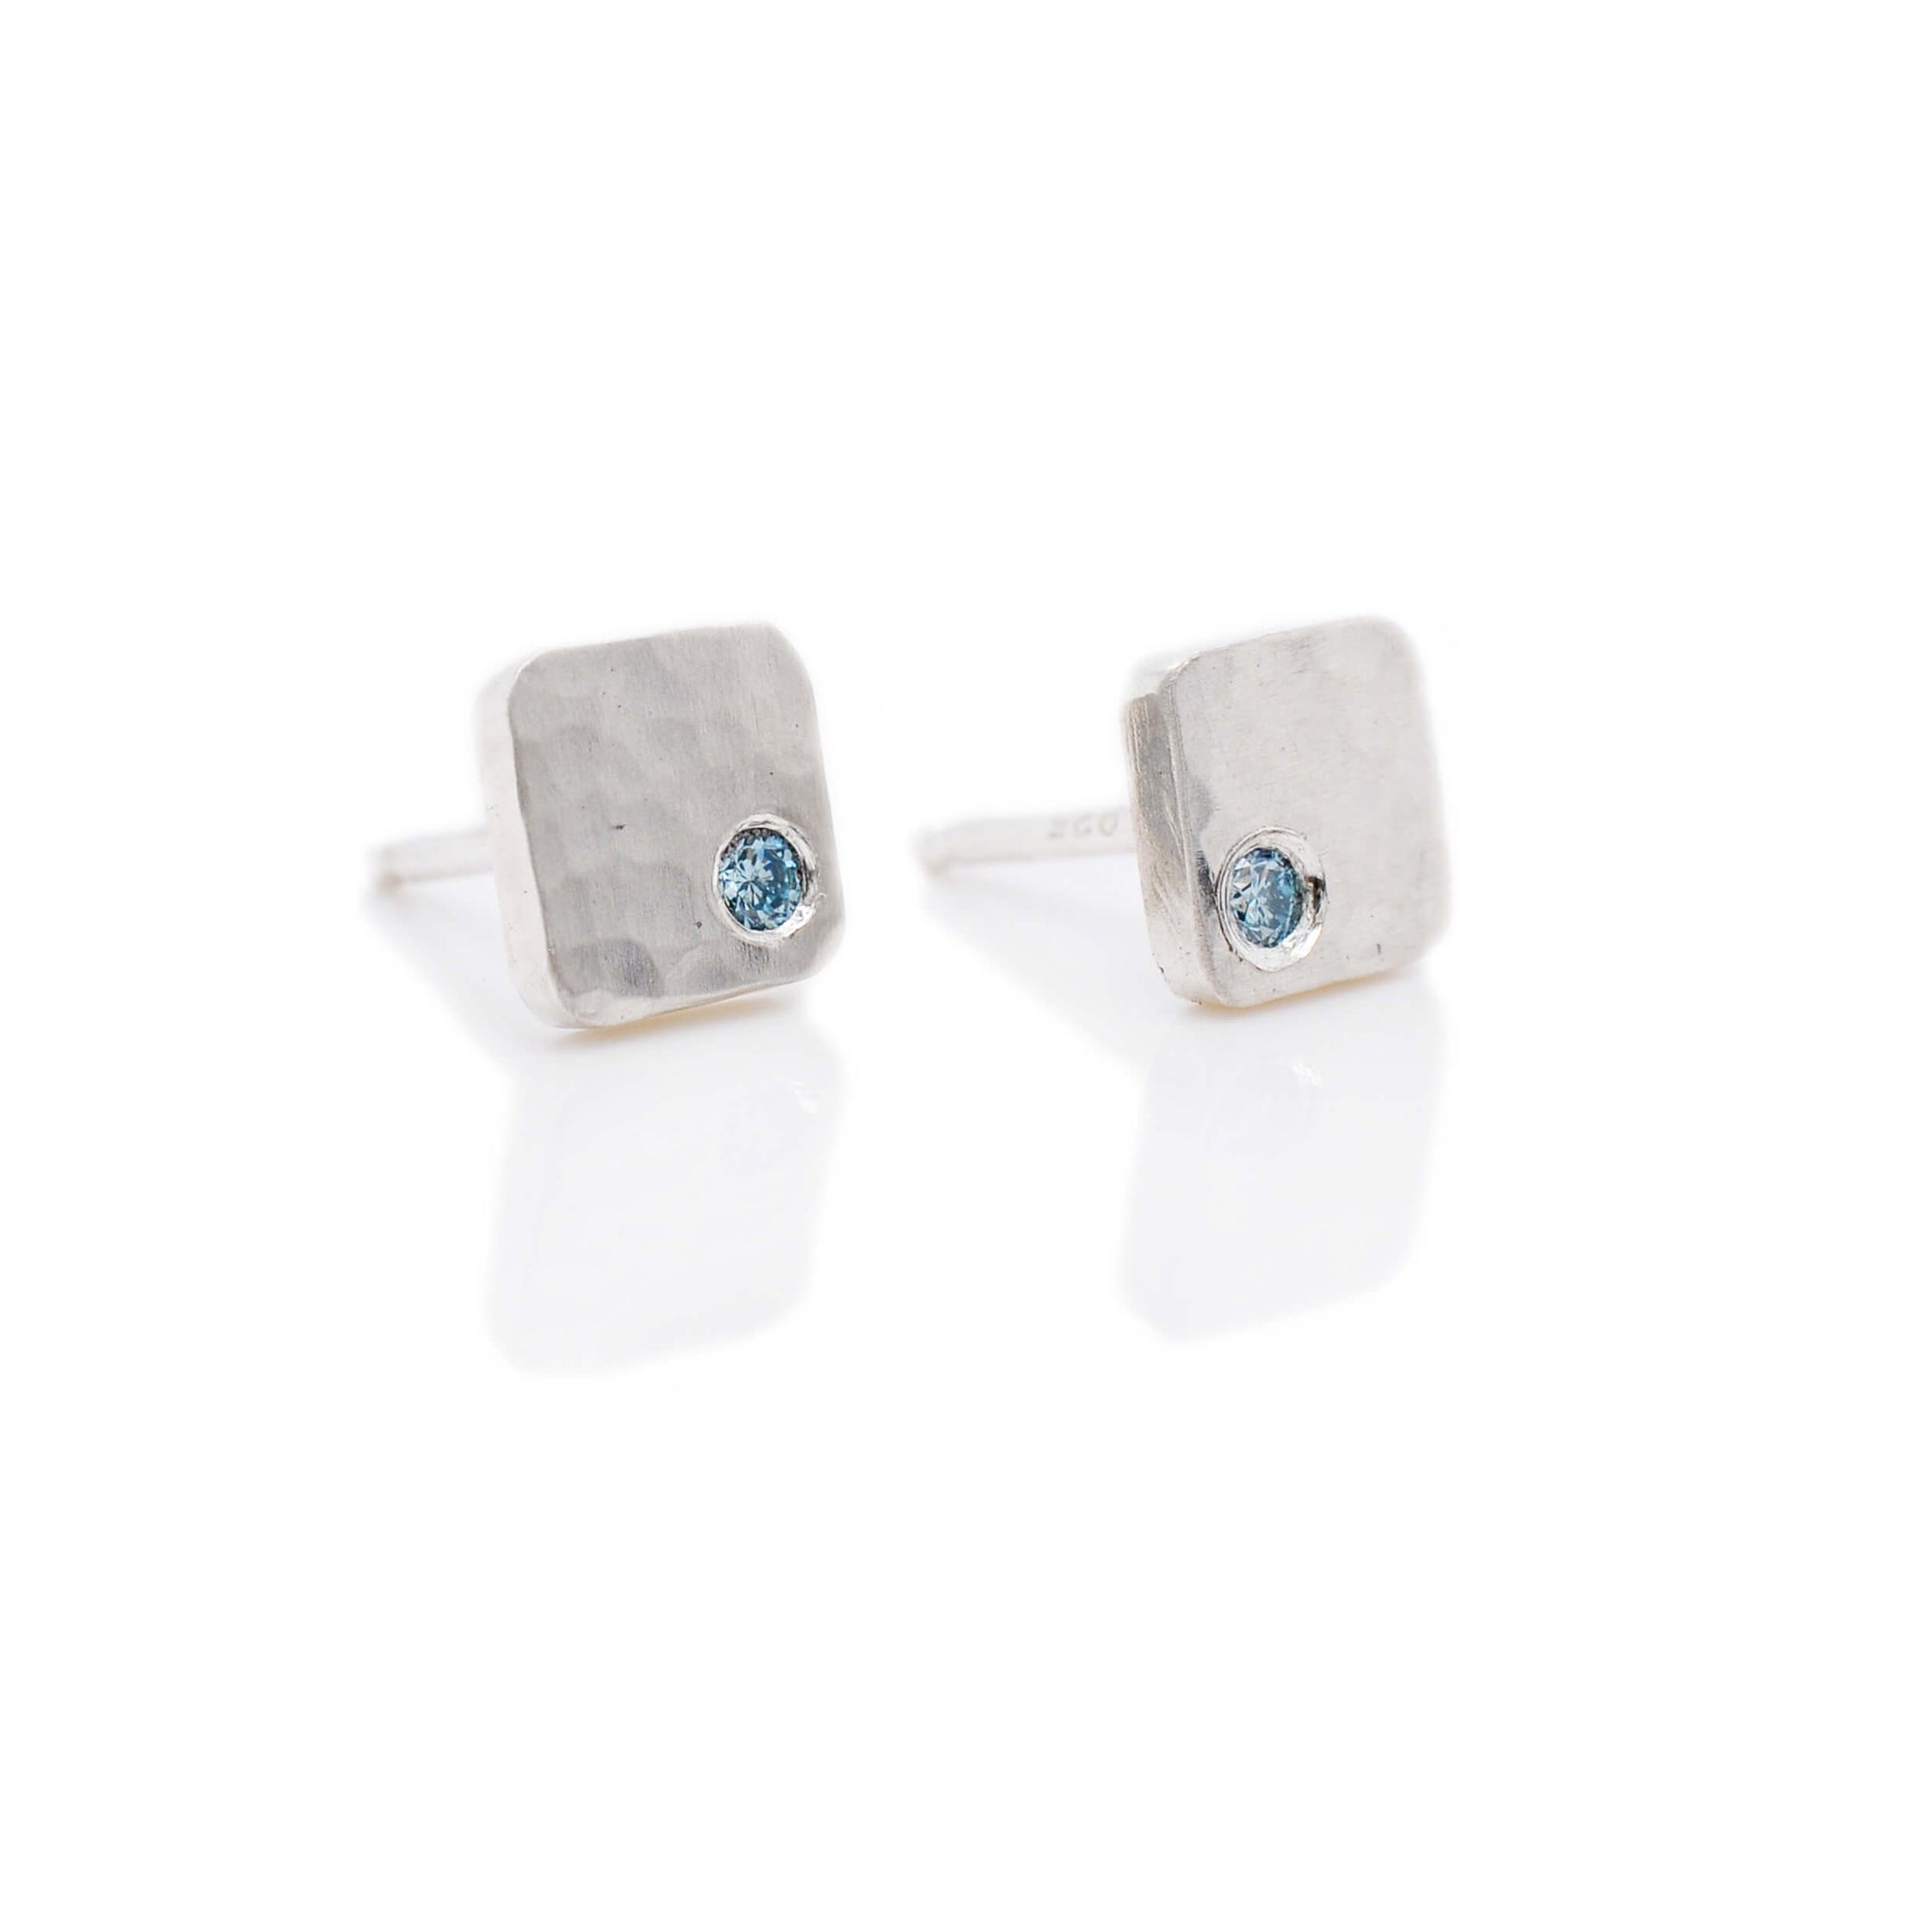 Hammered sterling silver square studs with flush set aqua diamonds. Handmade by EC Design Jewelry in Minneapolis, MN.